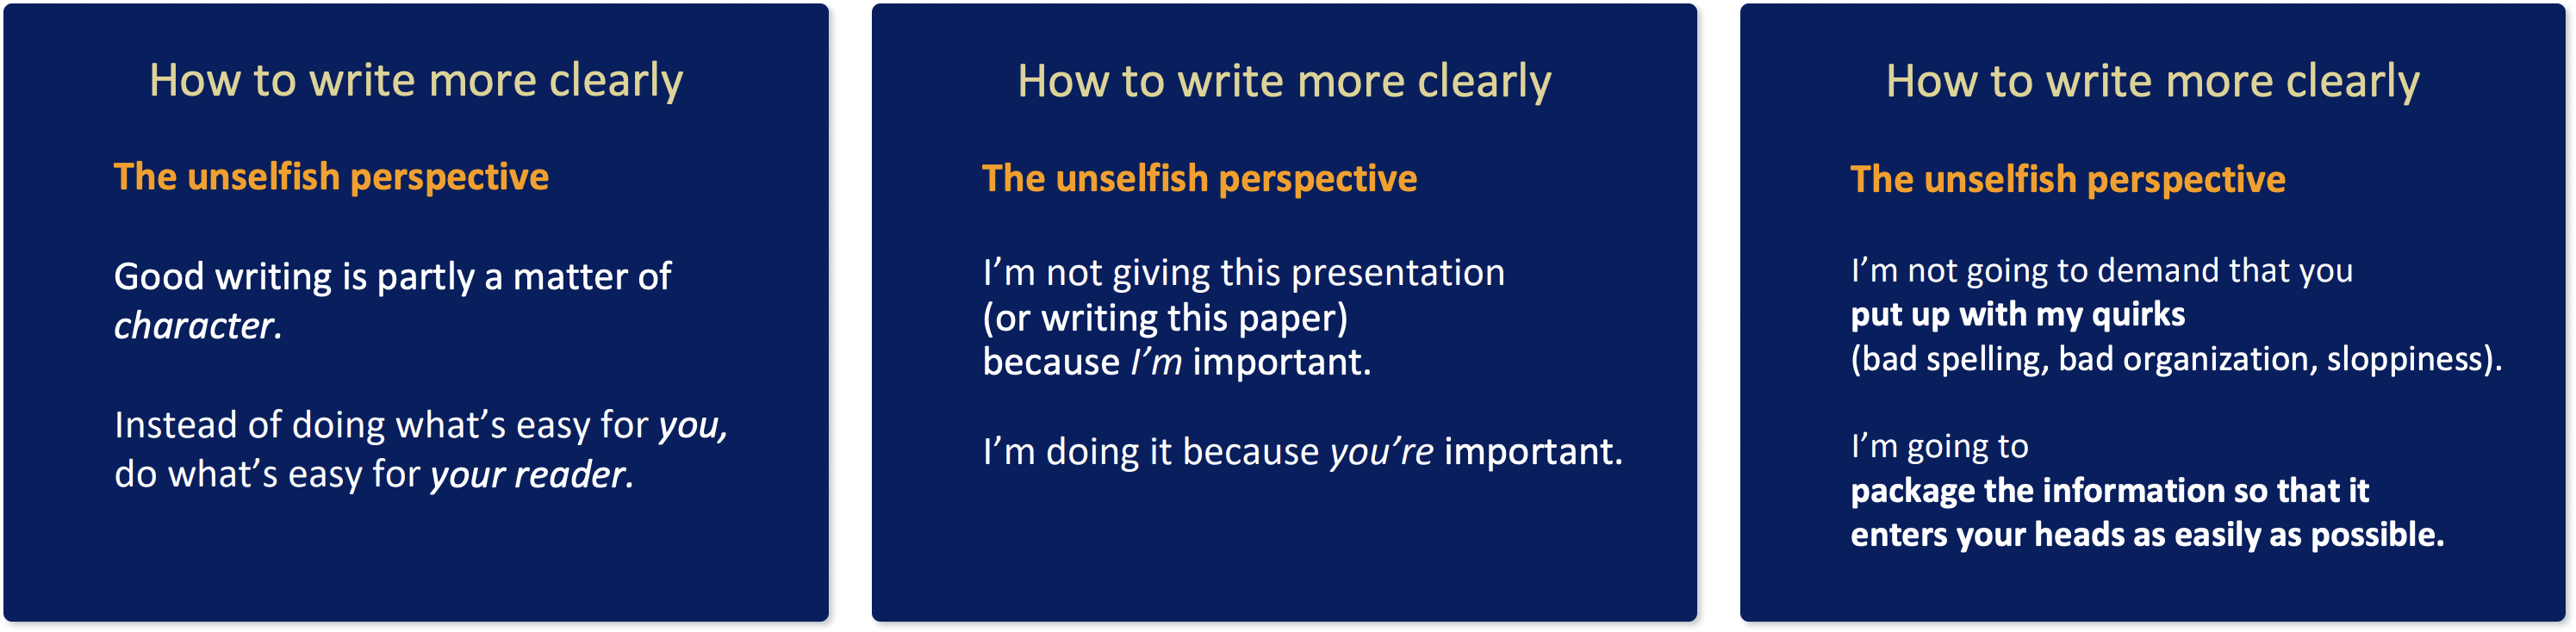 Three slides from a presentation about writing empathically. Do what's easy for the reader. The reader is important. Package information for easy consumption.